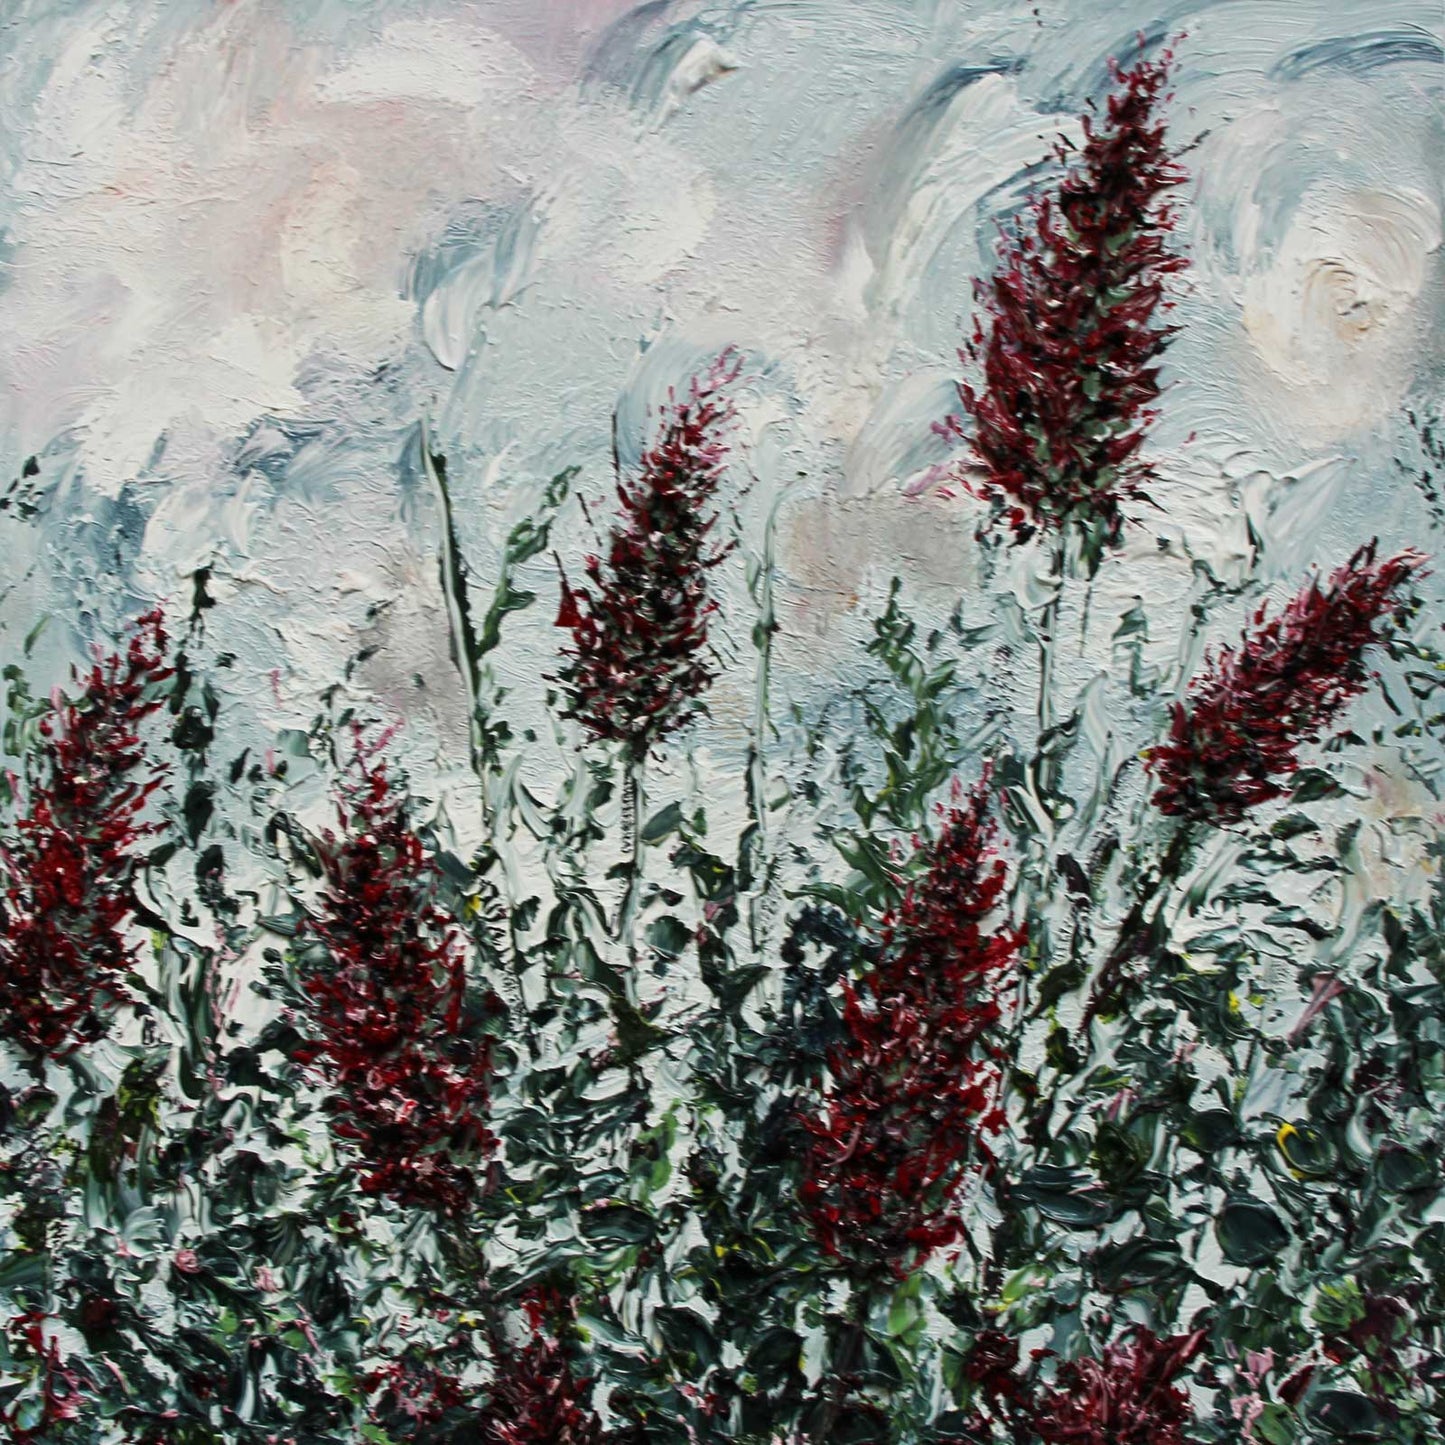 Textured flower painting in square format. The blooms are dark red against a swilring sky